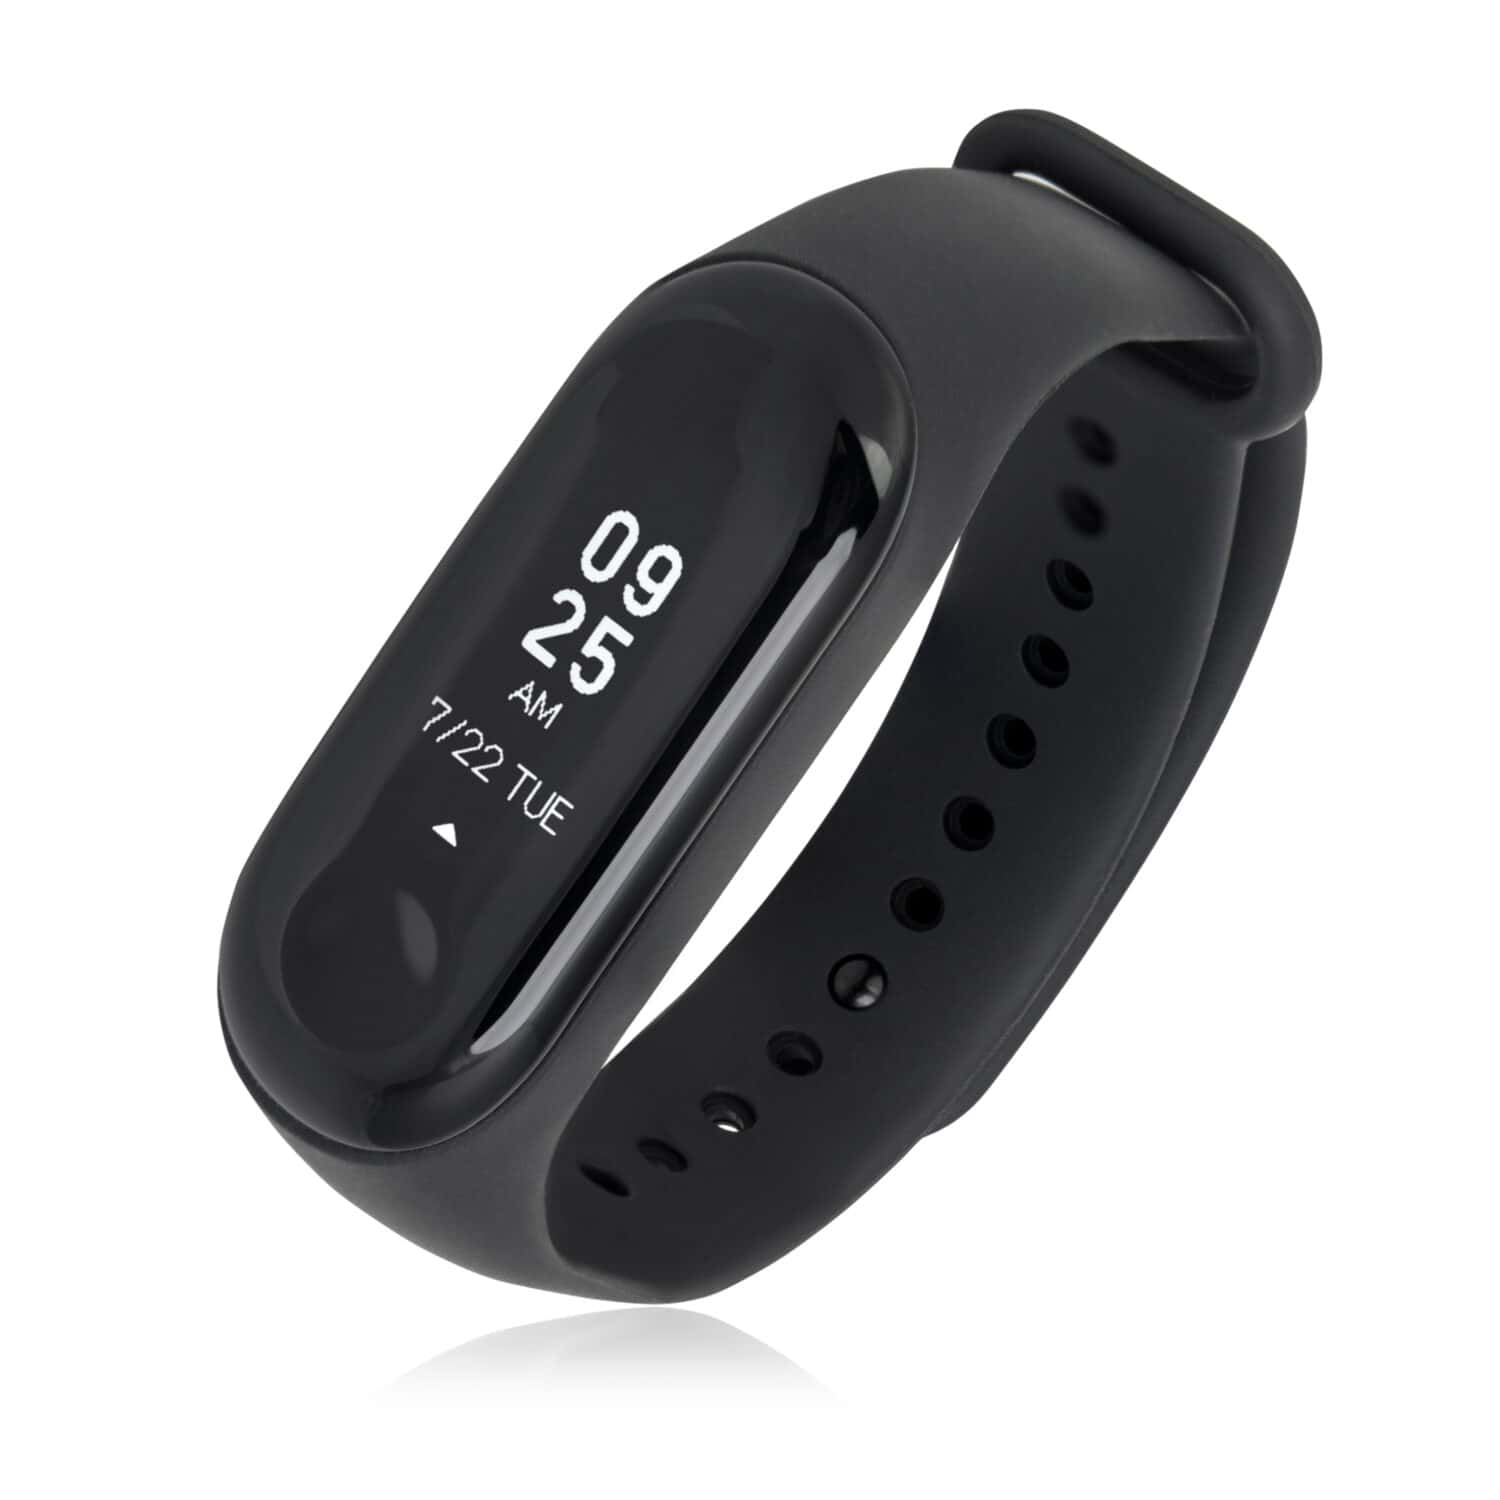 Xiaomi Smart Band 7 Pro (Global Version) with GPS, Health & Fitness  Activity Tracker High-Res 1.64 AMOLED Screen, Heart Rate & SPO₂  Monitoring, 110+